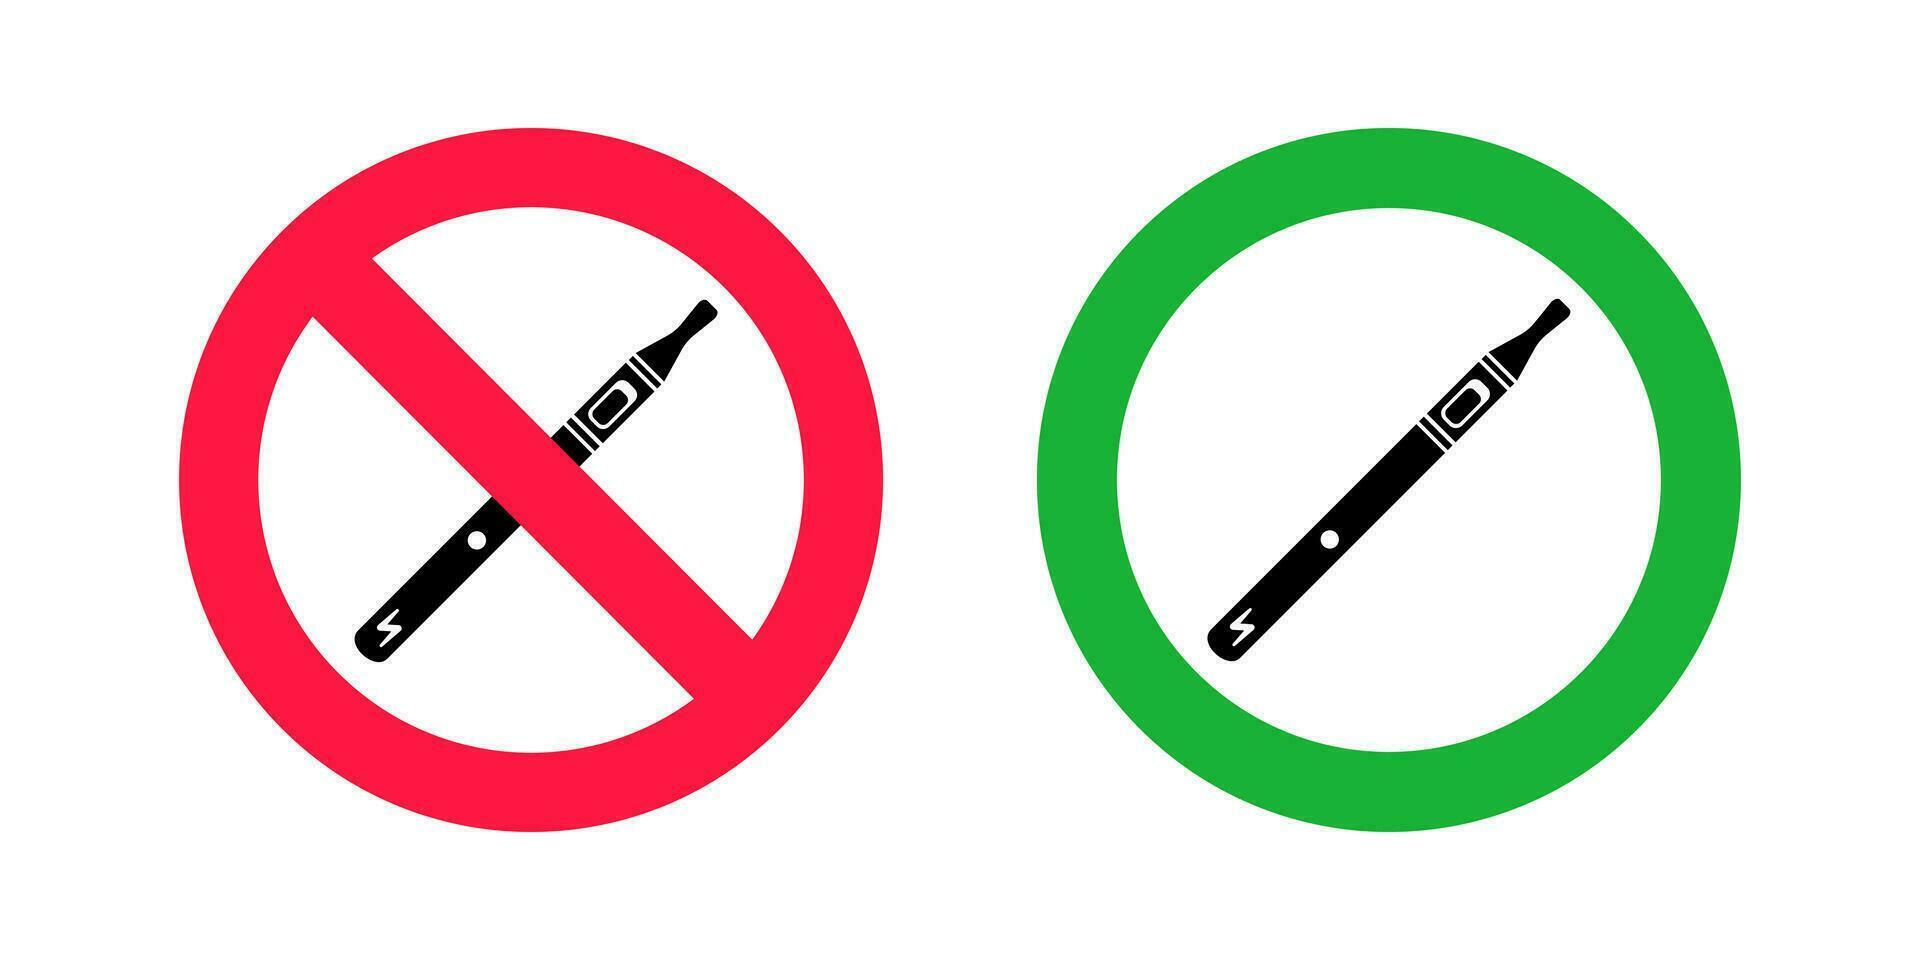 No vaping and vaping area signs. Red forbidden and green allowed circles signs vector